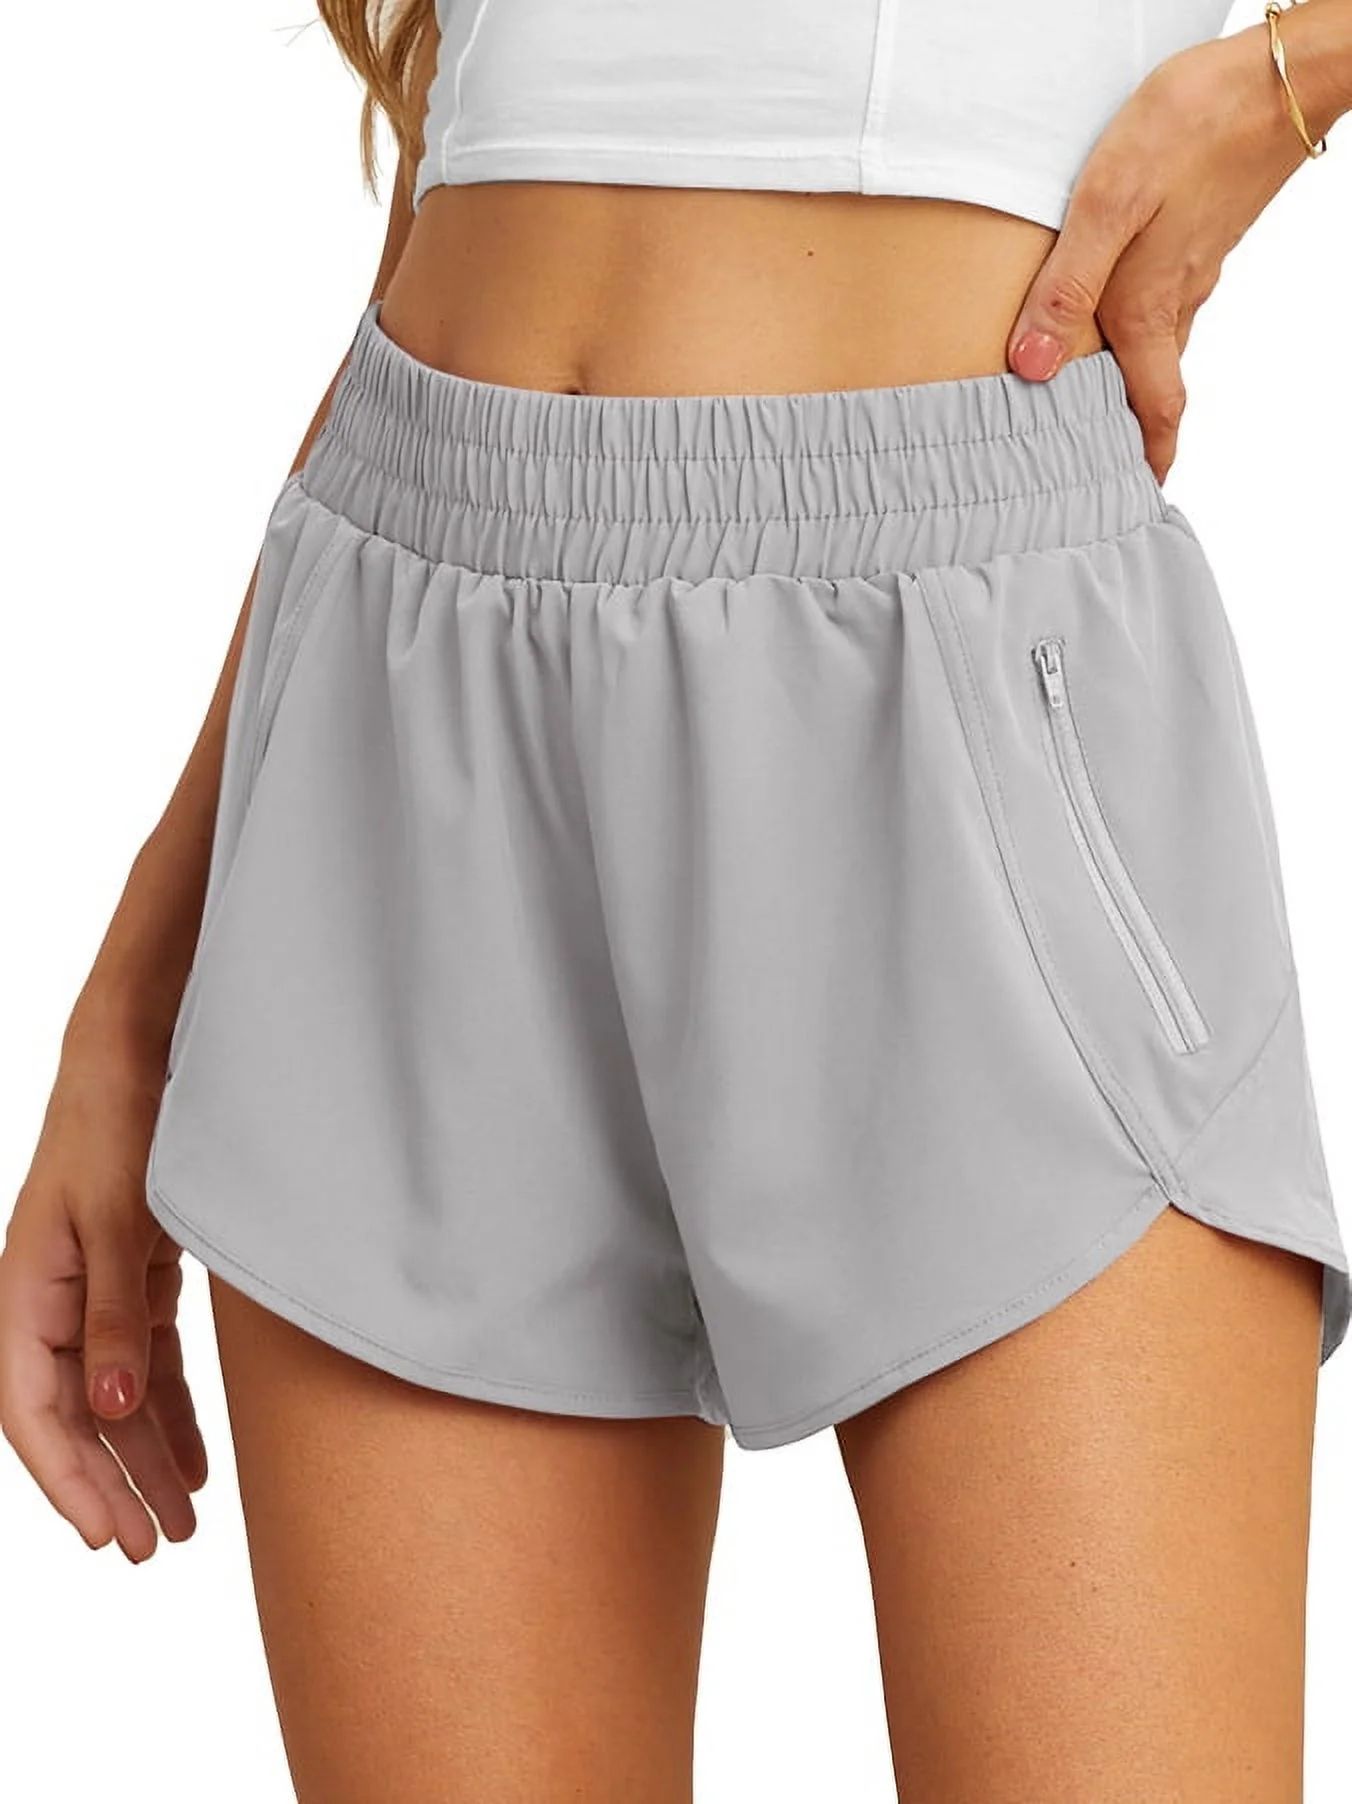 Cueply Women's Running Shorts High Waisted Athletic Gym Workout Shorts with Liner Zipper Pockets ... | Walmart (US)